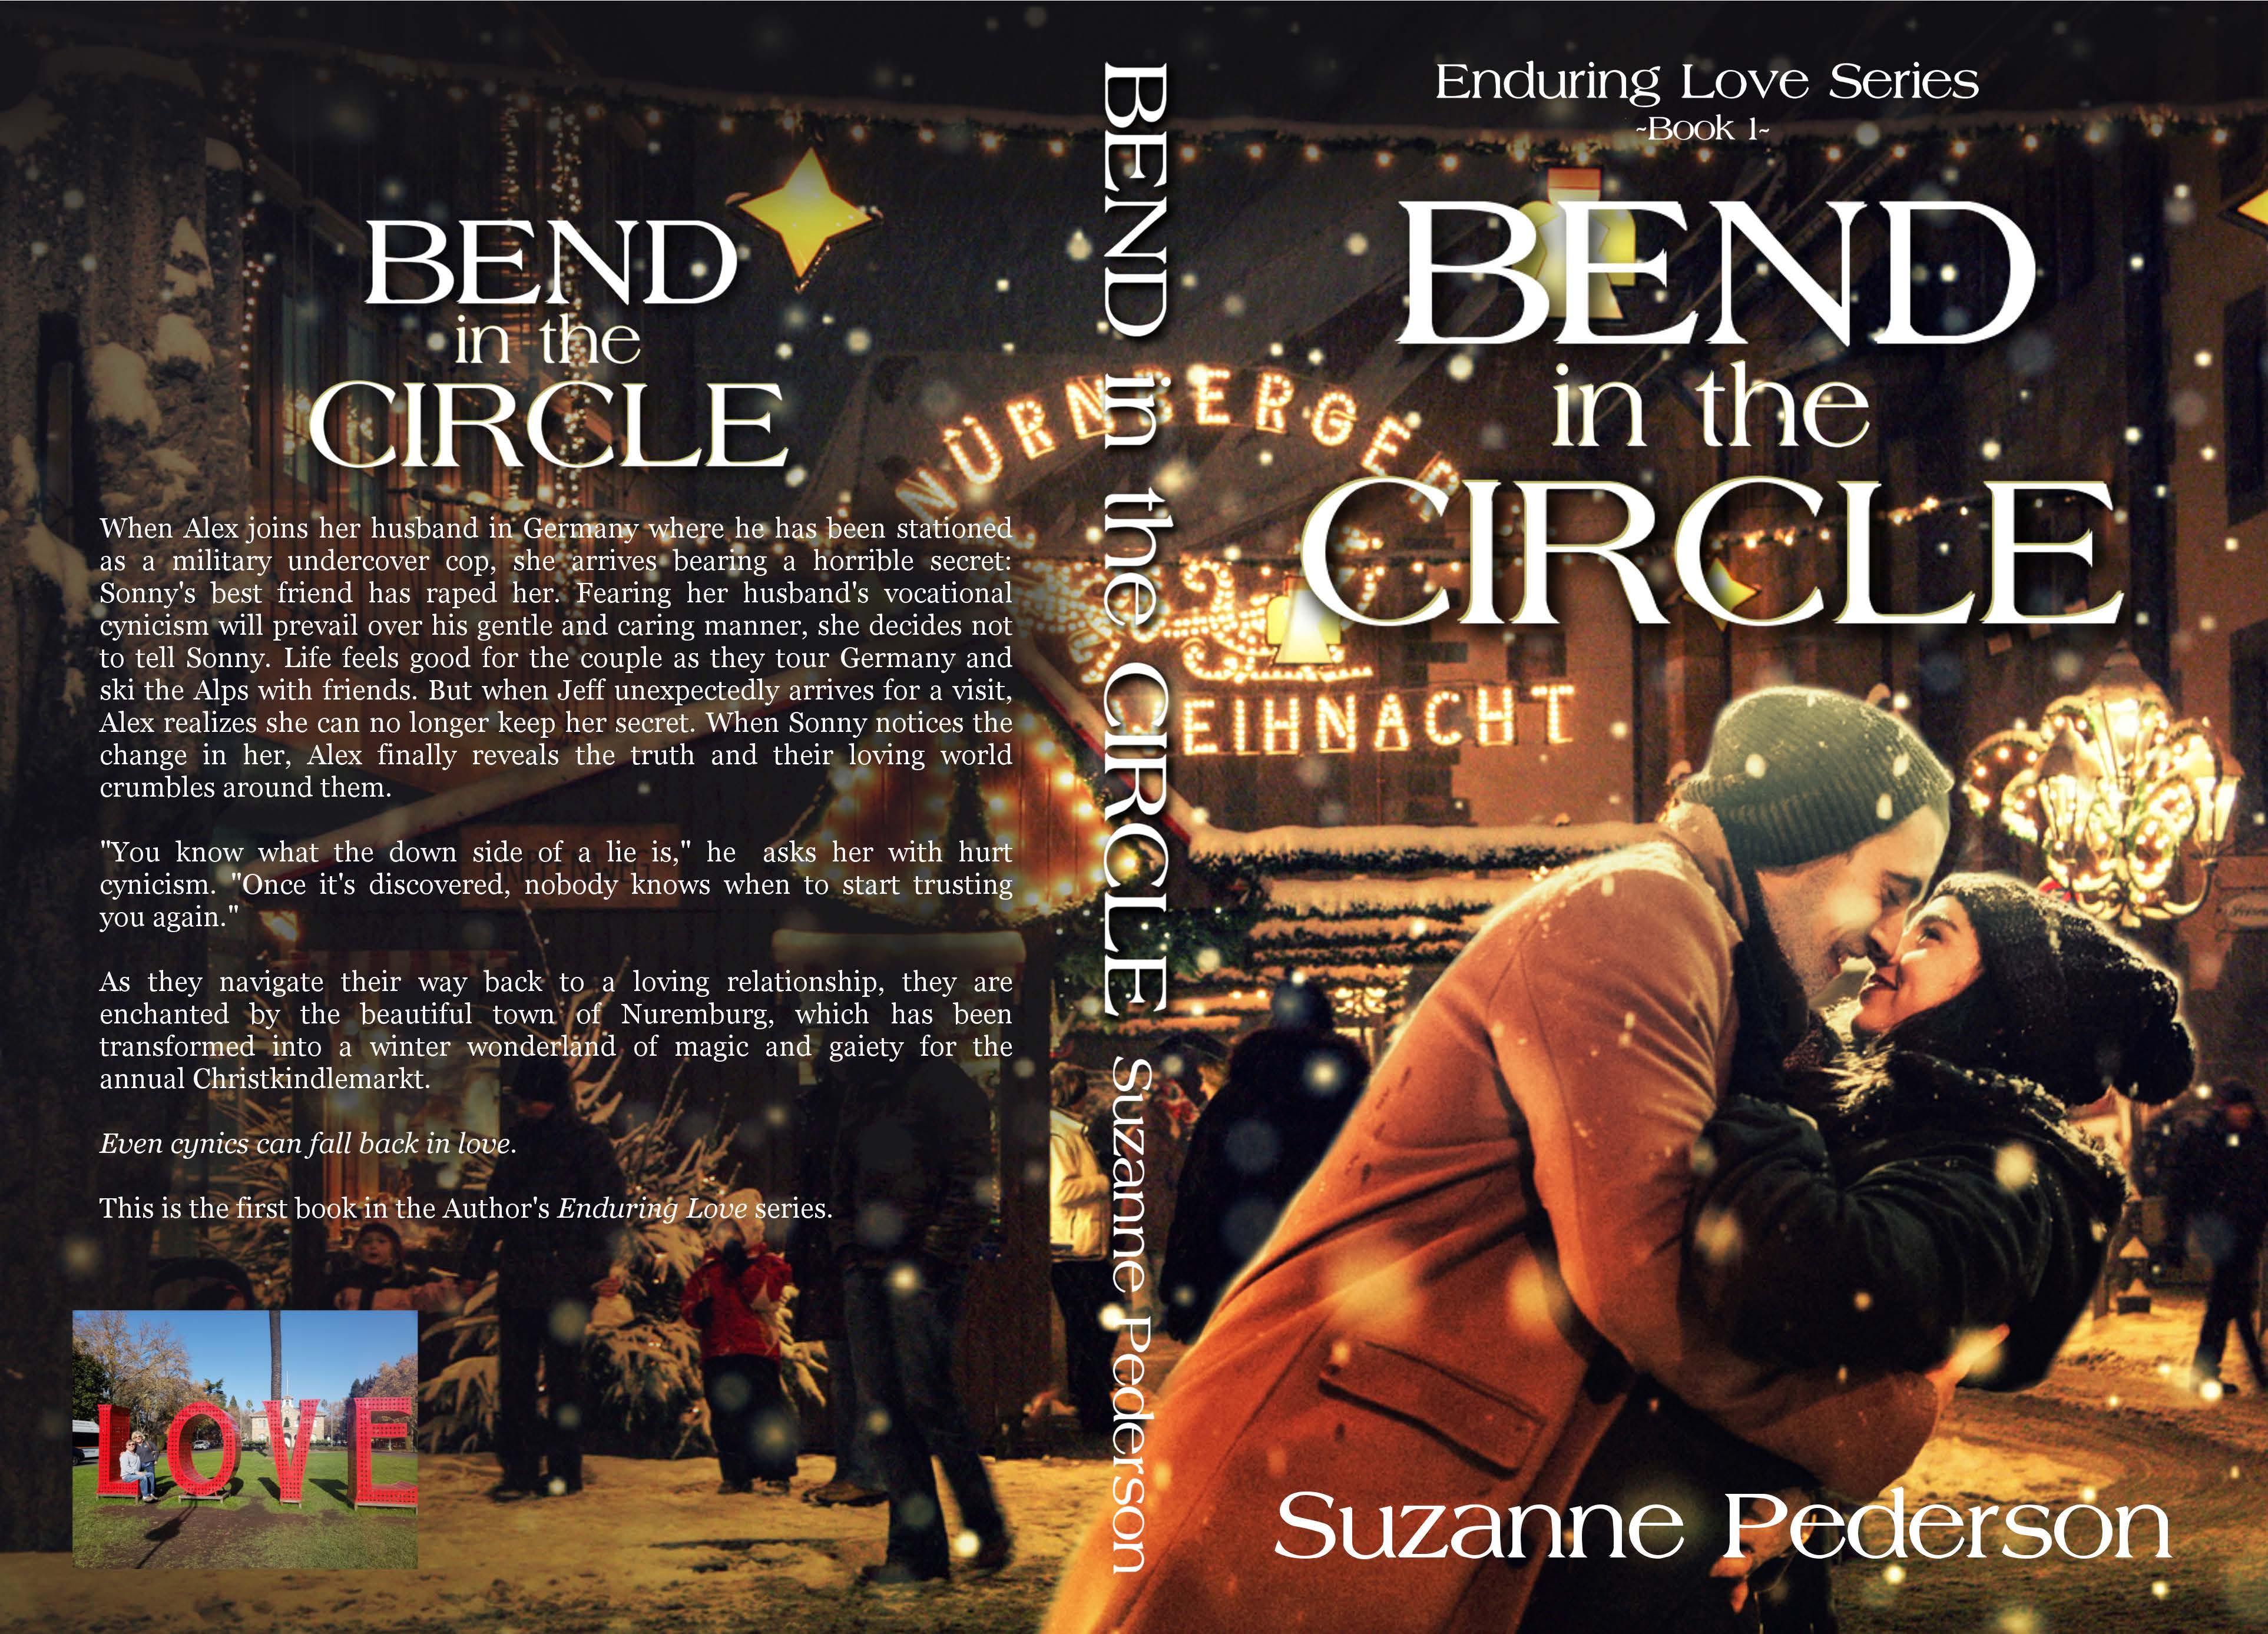 Bend in the Circle.  Book 1 in the Enduring Love Series.